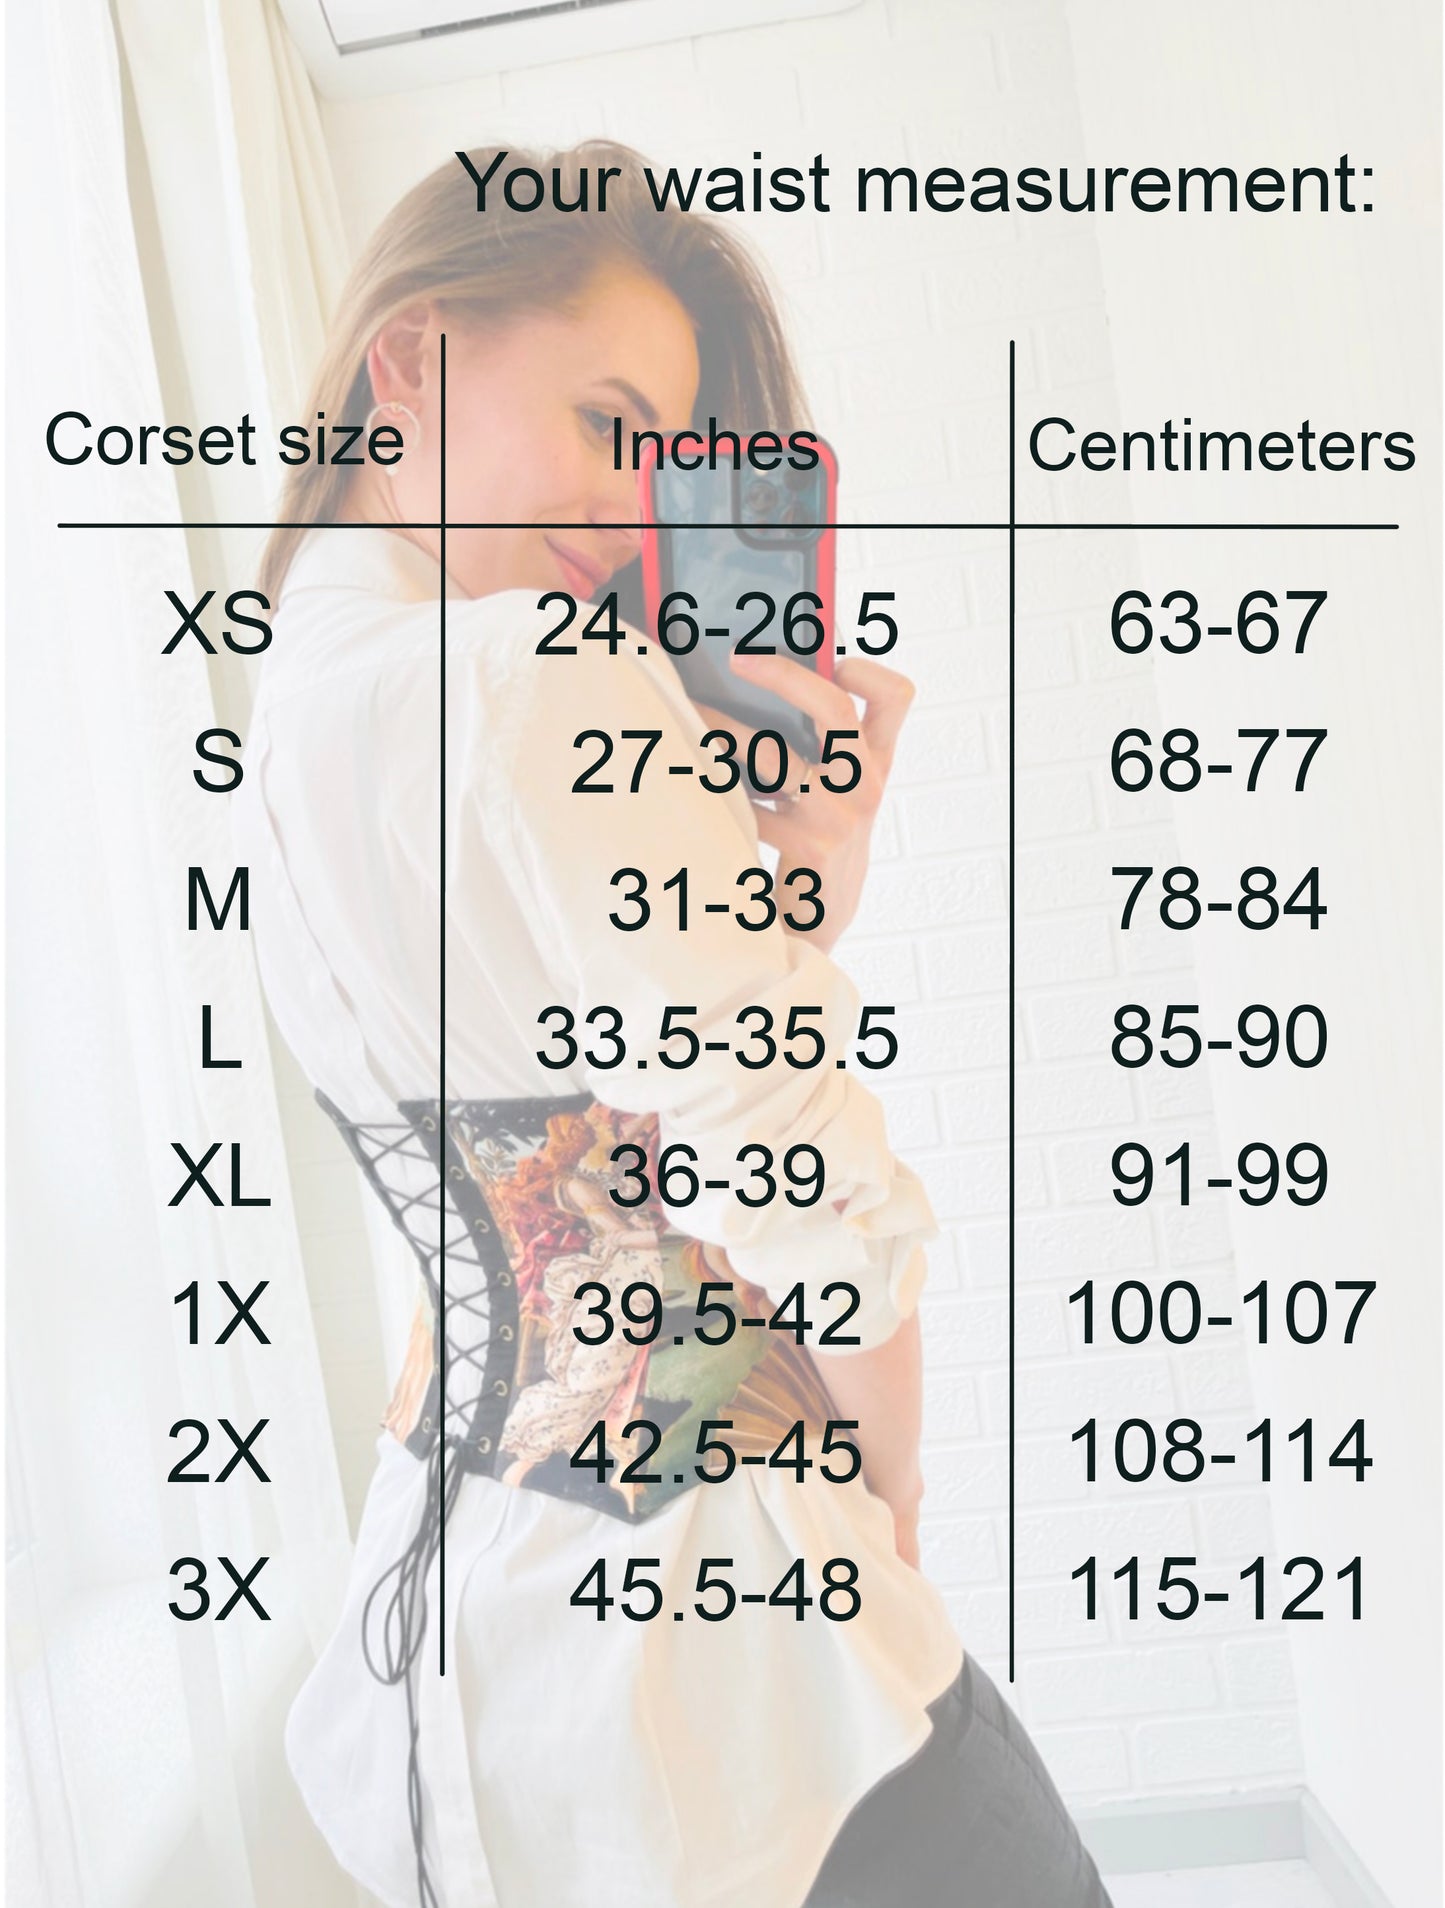 Coset size chart for OhMyButterfly Renaissance Corsets